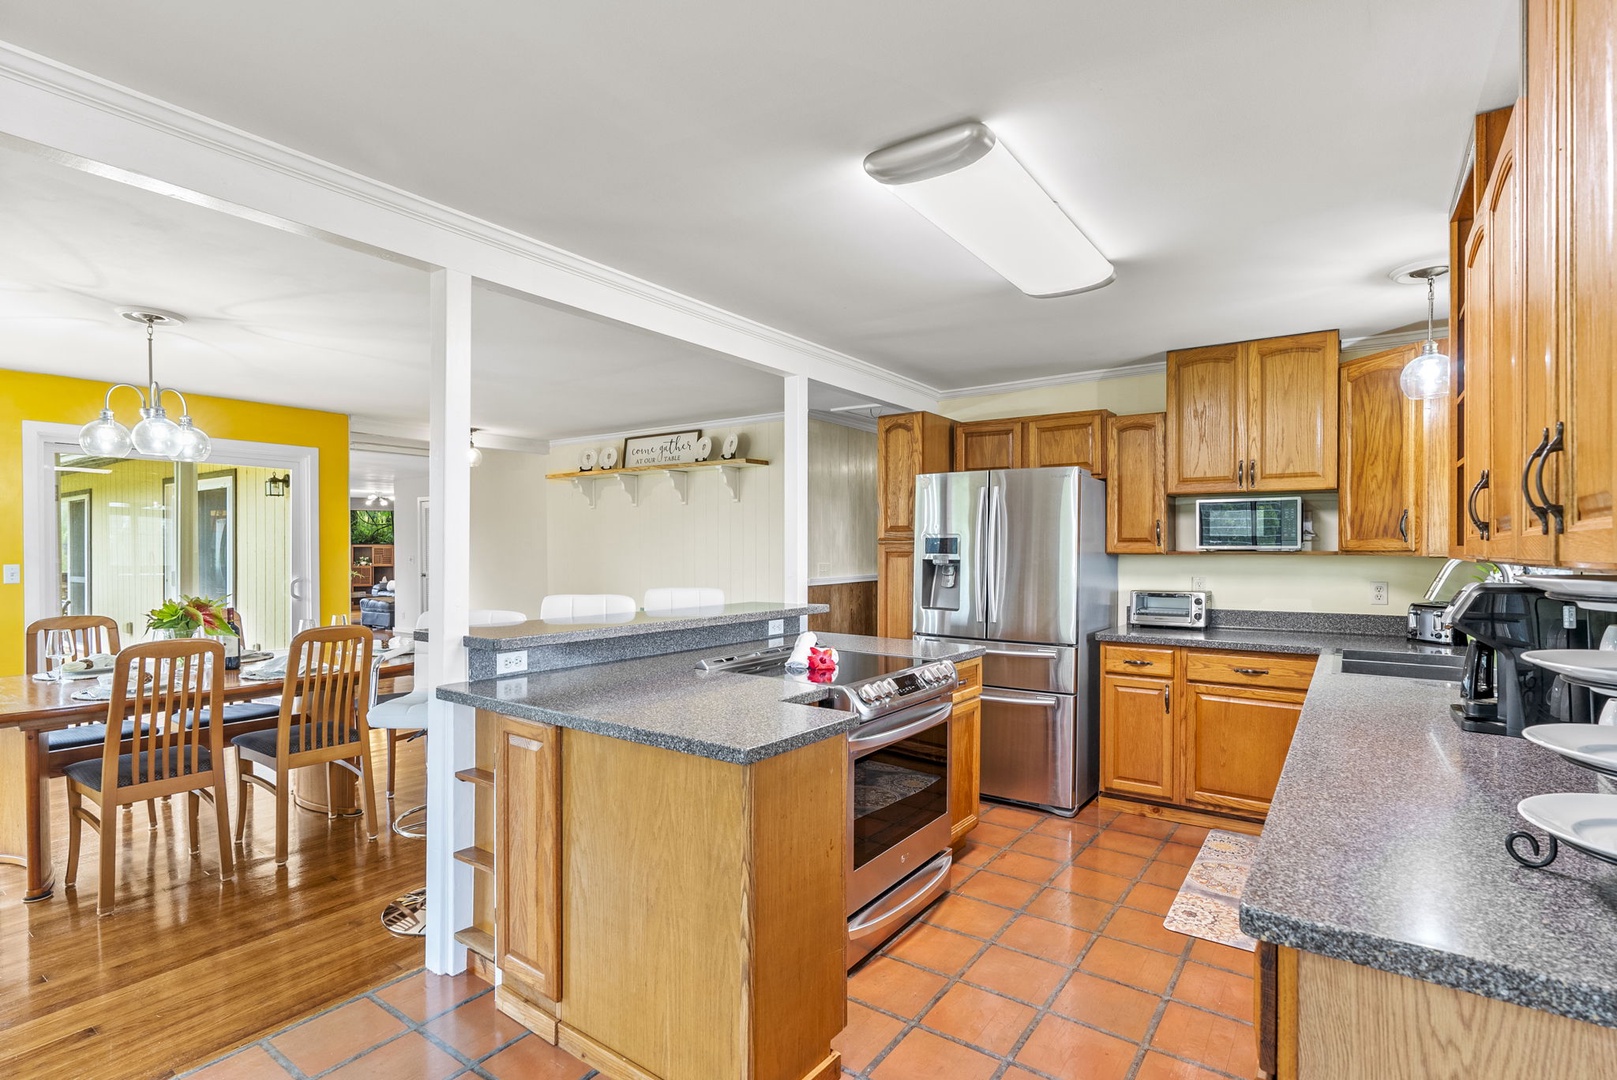 Hauula Vacation Rentals, Mau Loa Hale - Kitchen opens to the dining area